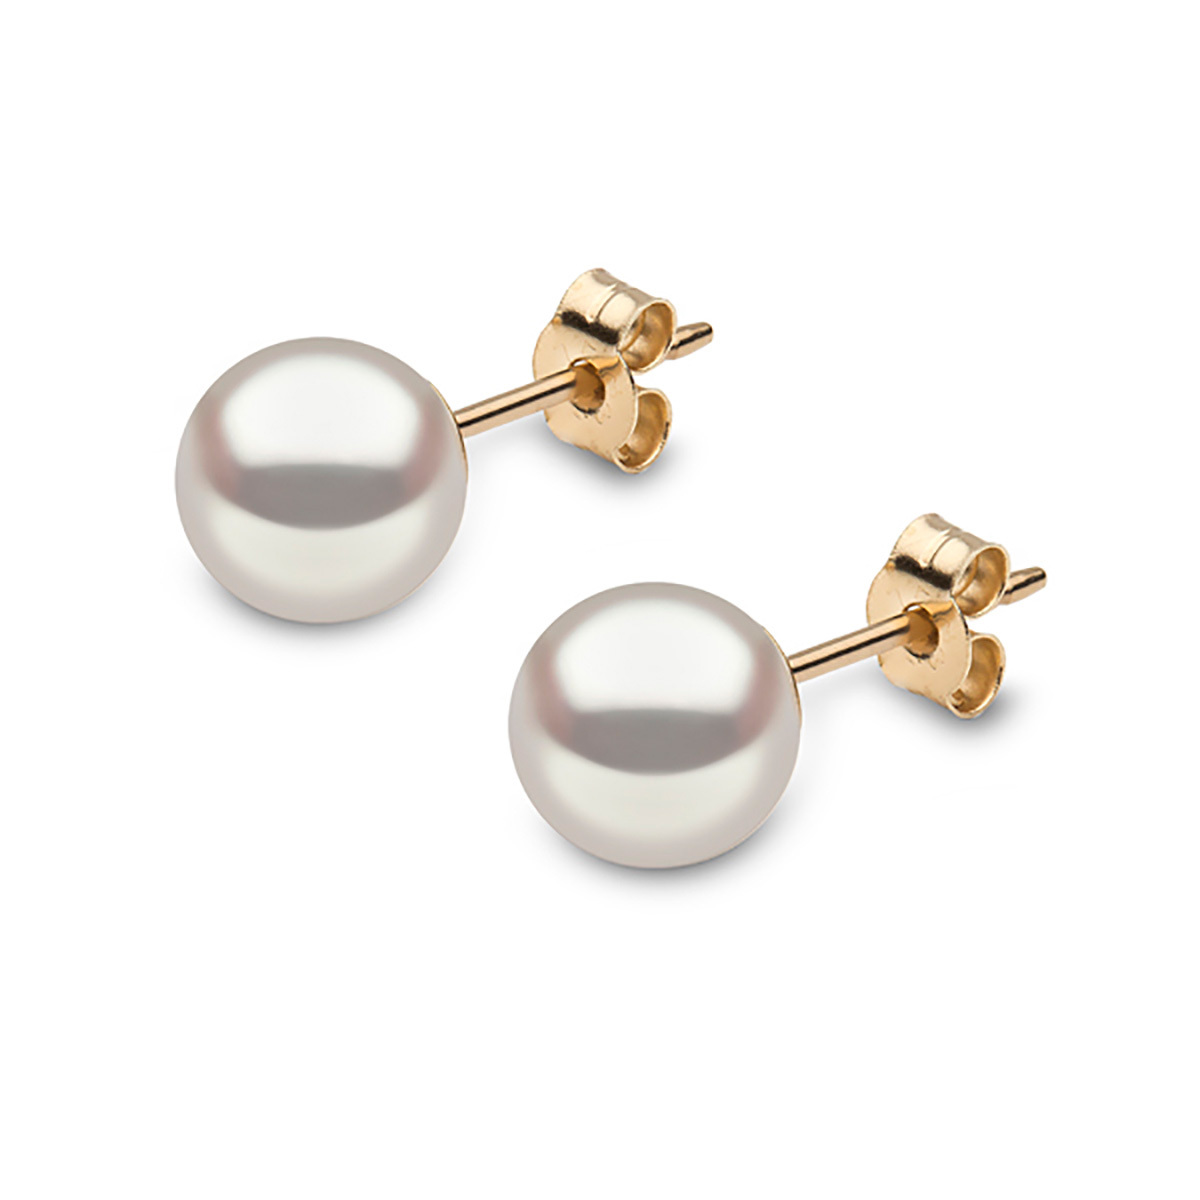 6.5-7mm Cultured Freshwater White Pearl Stud Earrings, 18ct Yellow Gold